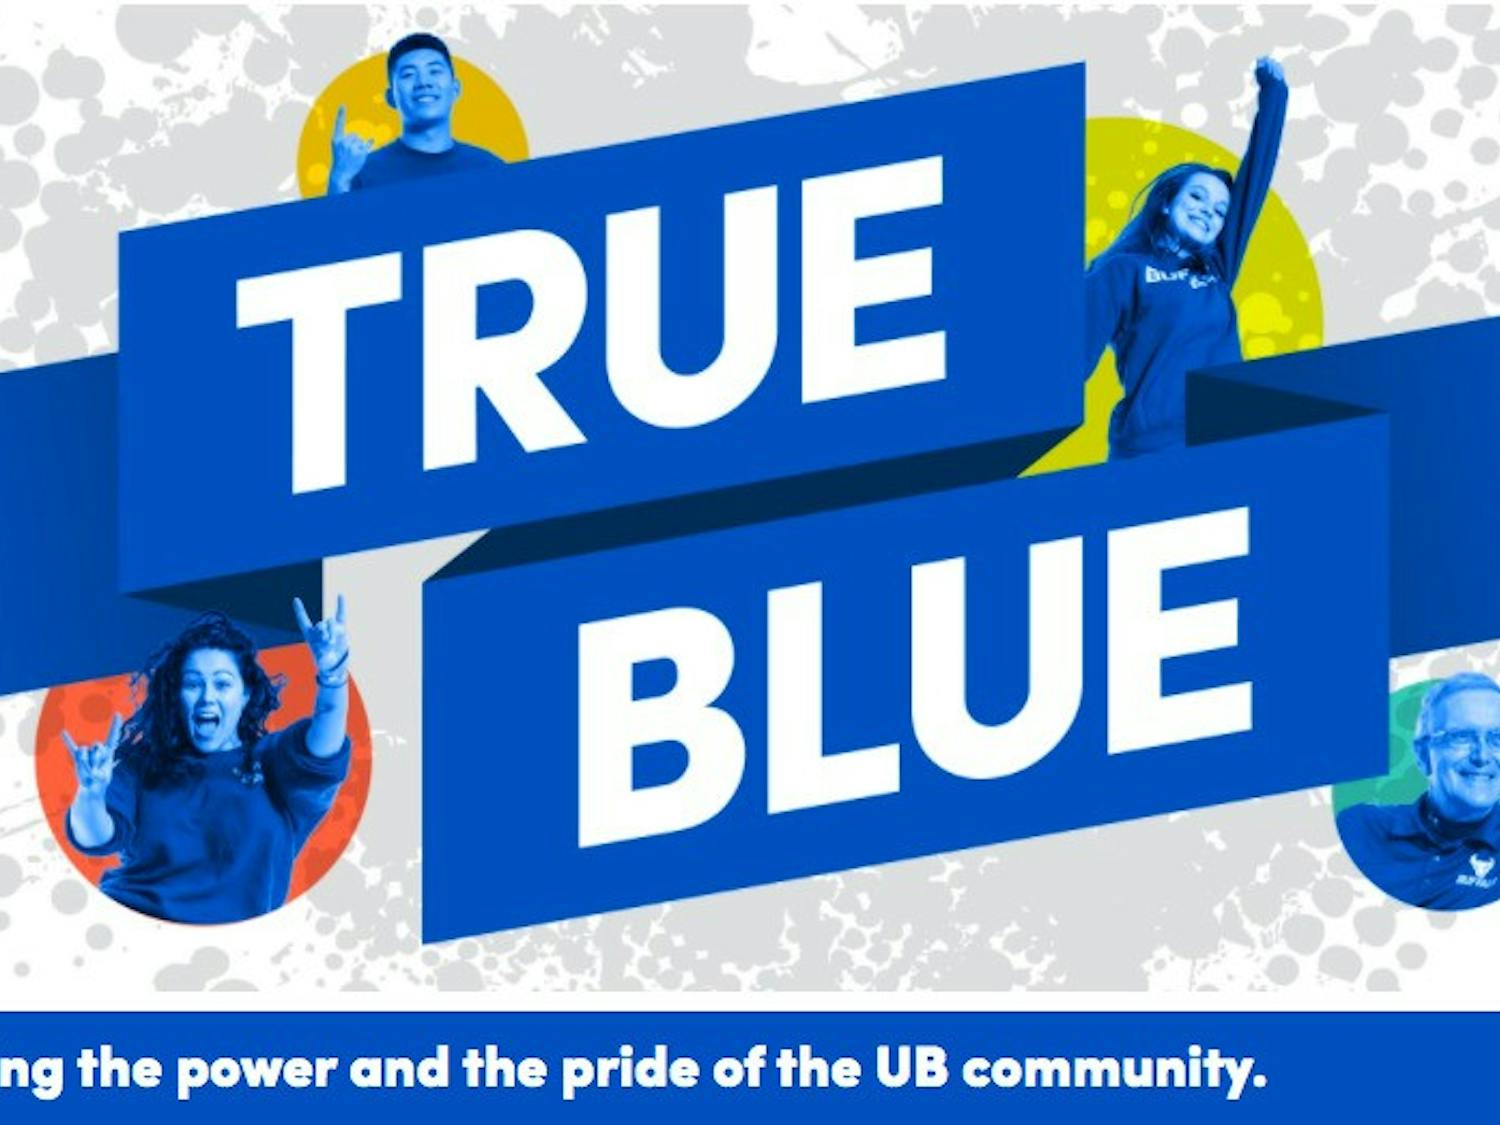 UB has launched a new initiative called “True Blue,” which is intended to highlight the students, faculty, staff and alumni who make up the university community.